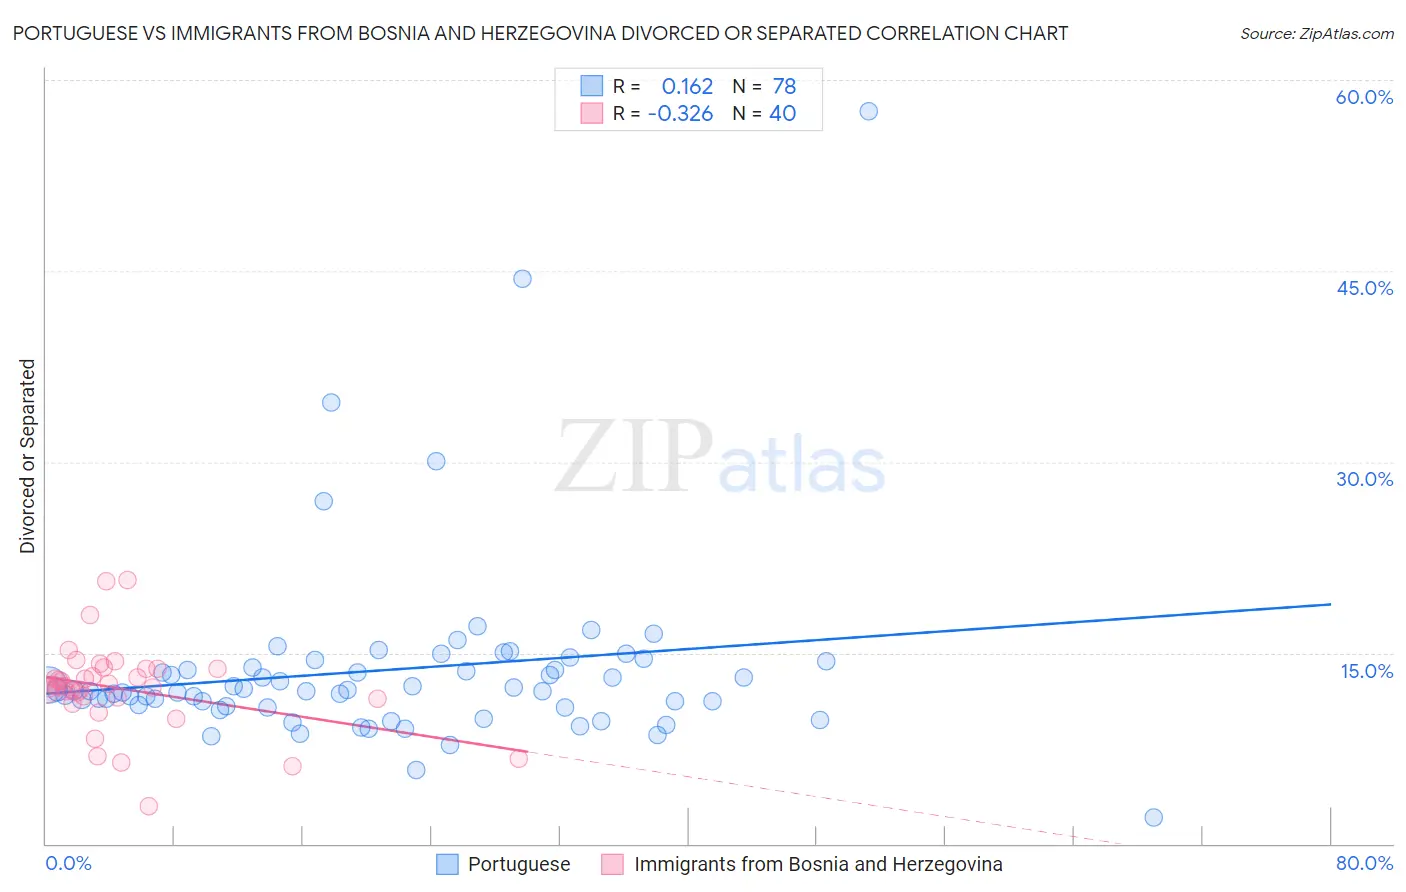 Portuguese vs Immigrants from Bosnia and Herzegovina Divorced or Separated